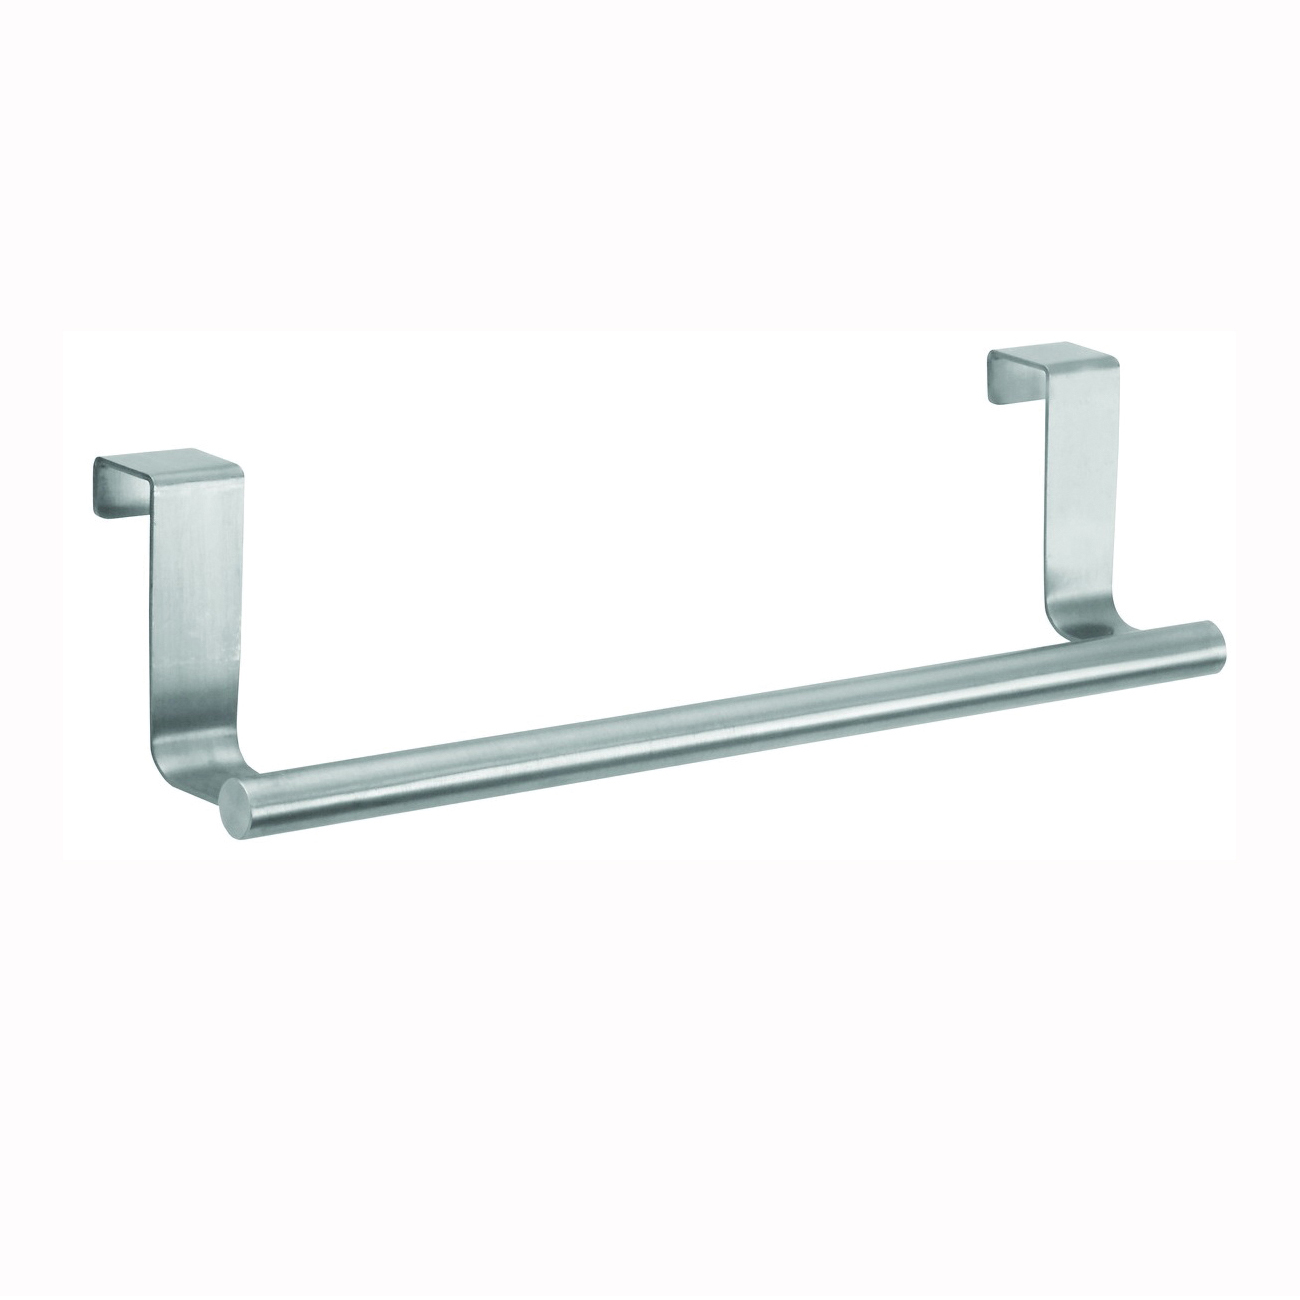 iDESIGN 29450 Towel Bar, Stainless Steel, Brushed, Surface Mounting - 1